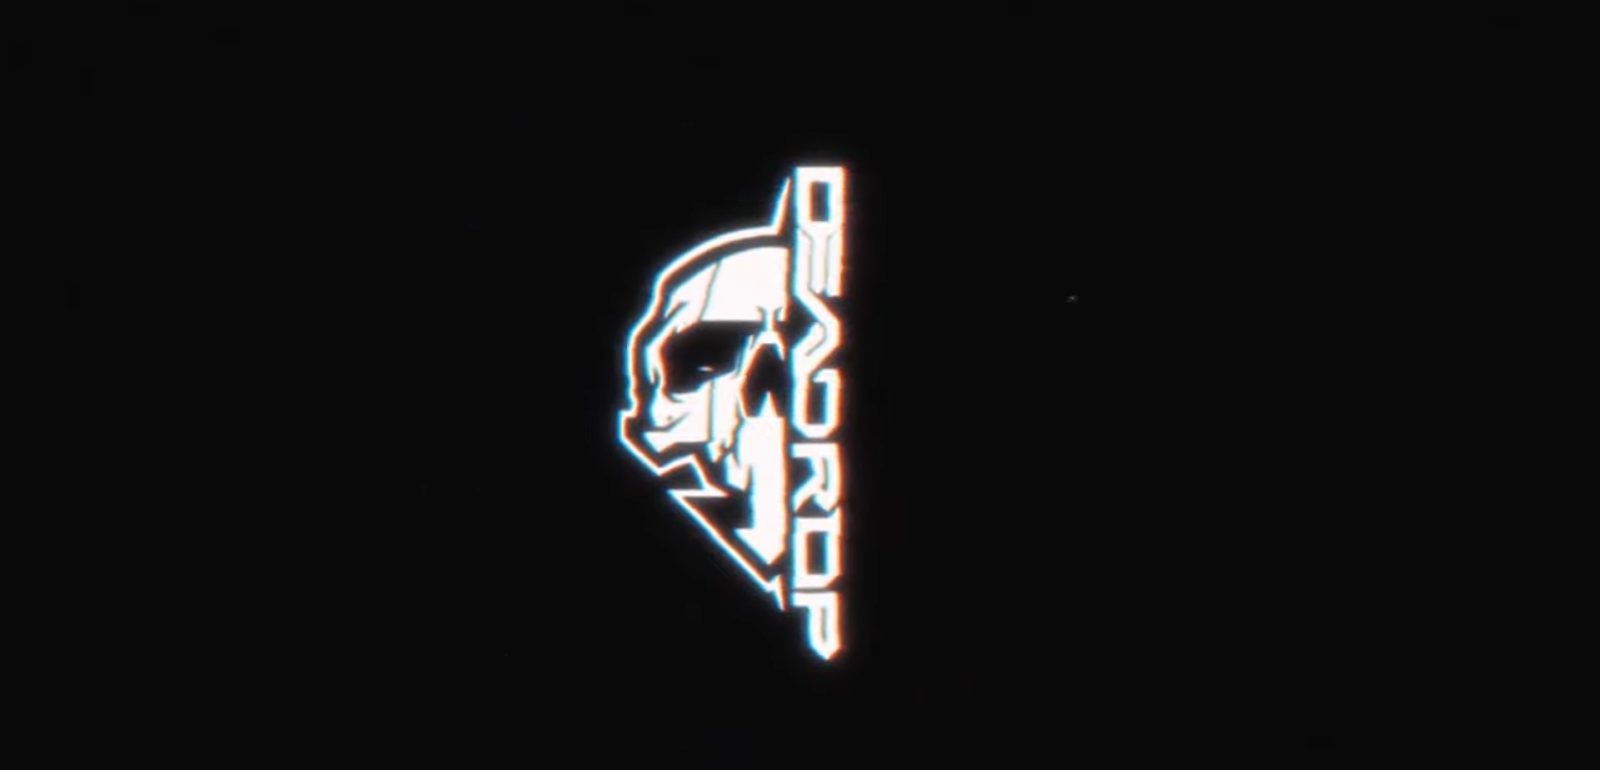 A neon logo featuring a stylized Spartan helmet and text